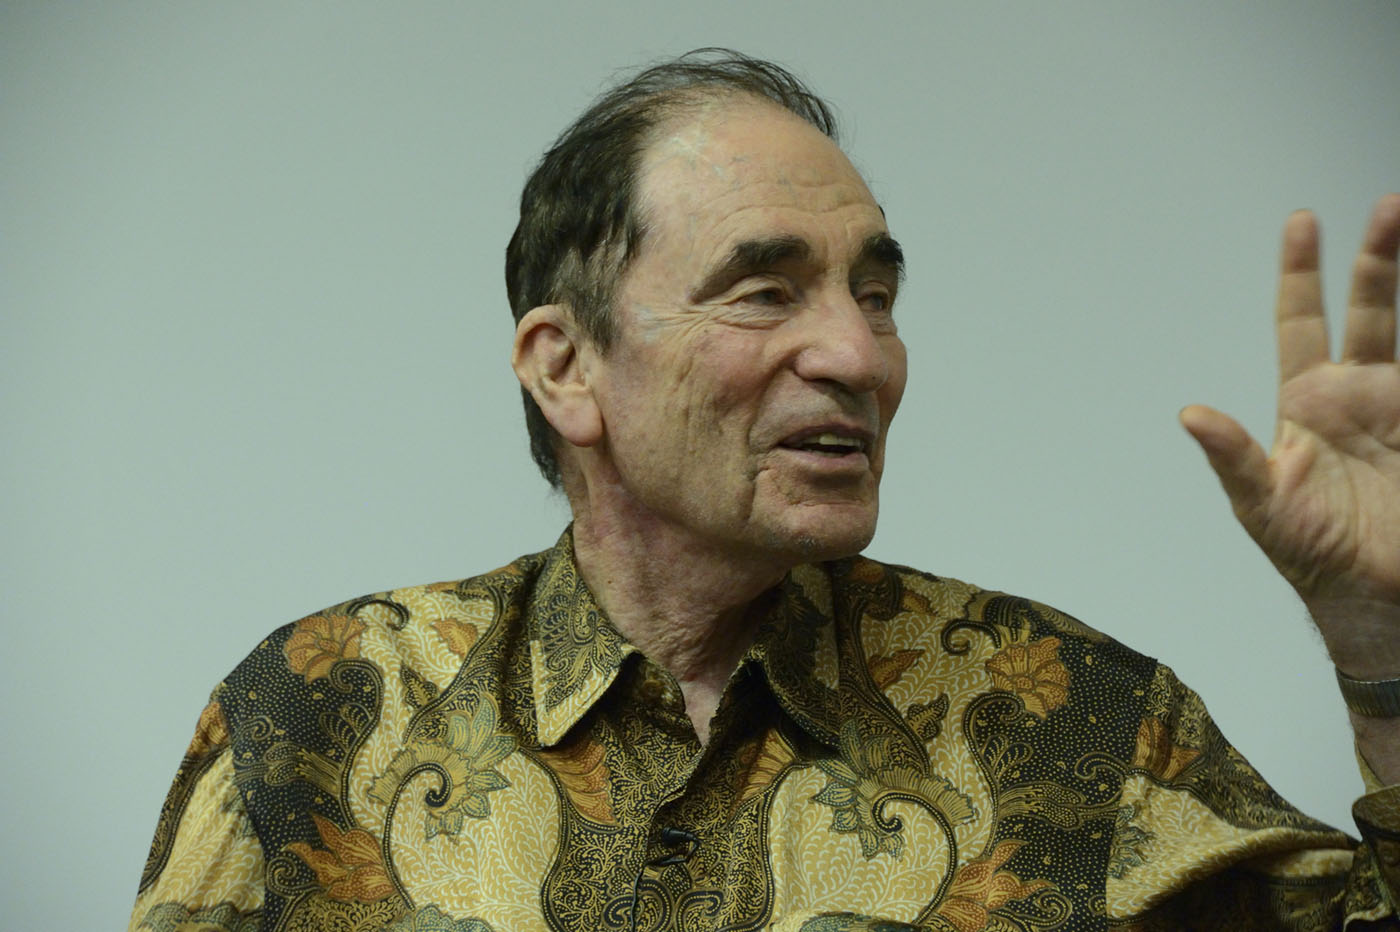 Clare Hall Ashby Lecture 2015 - Albie Sachs's image